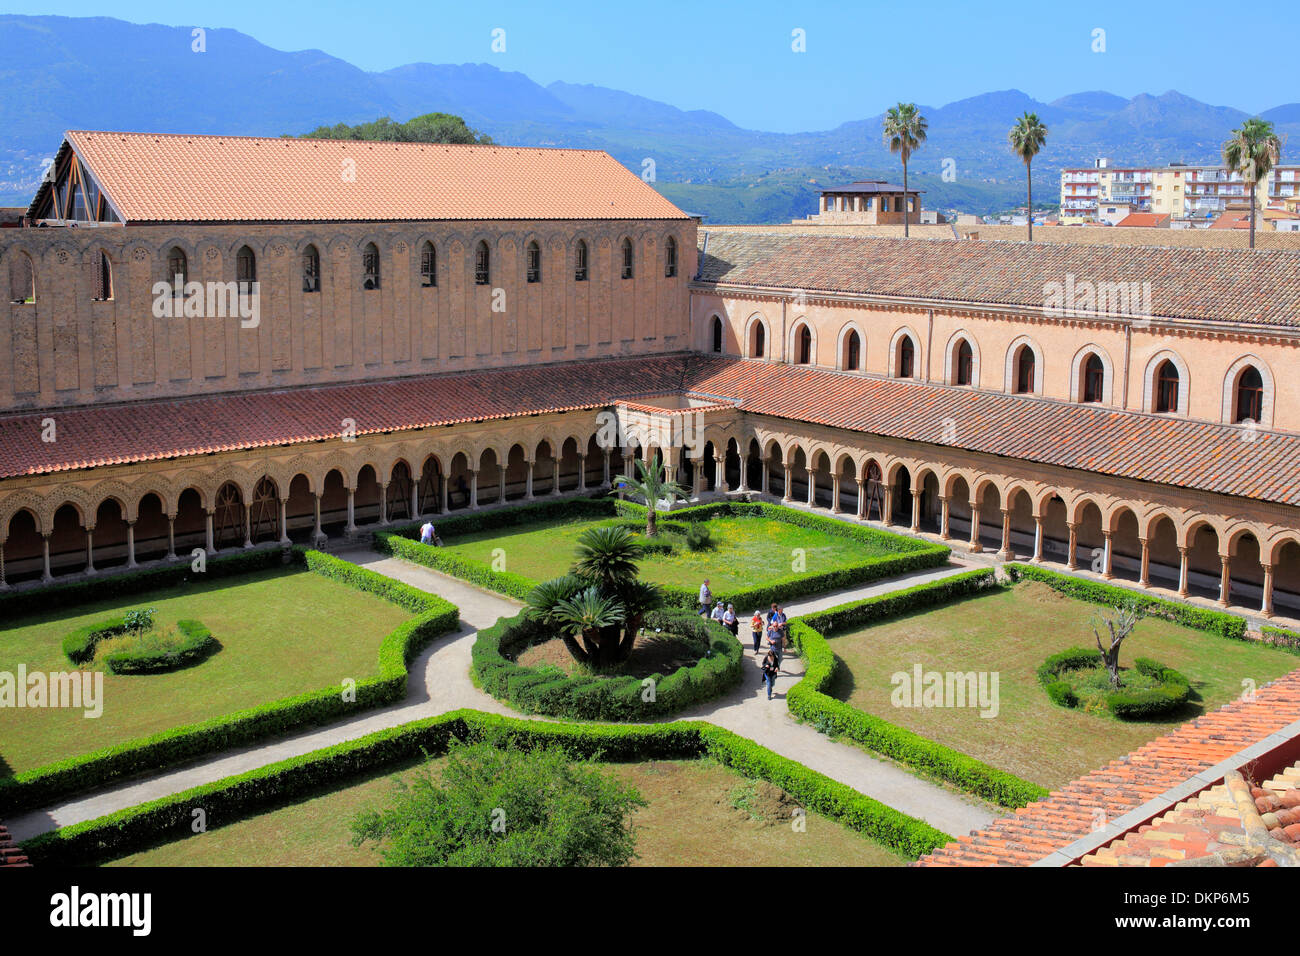 Cloister of Monreale Cathedral, Monreale, Sicily, Italy Stock Photo